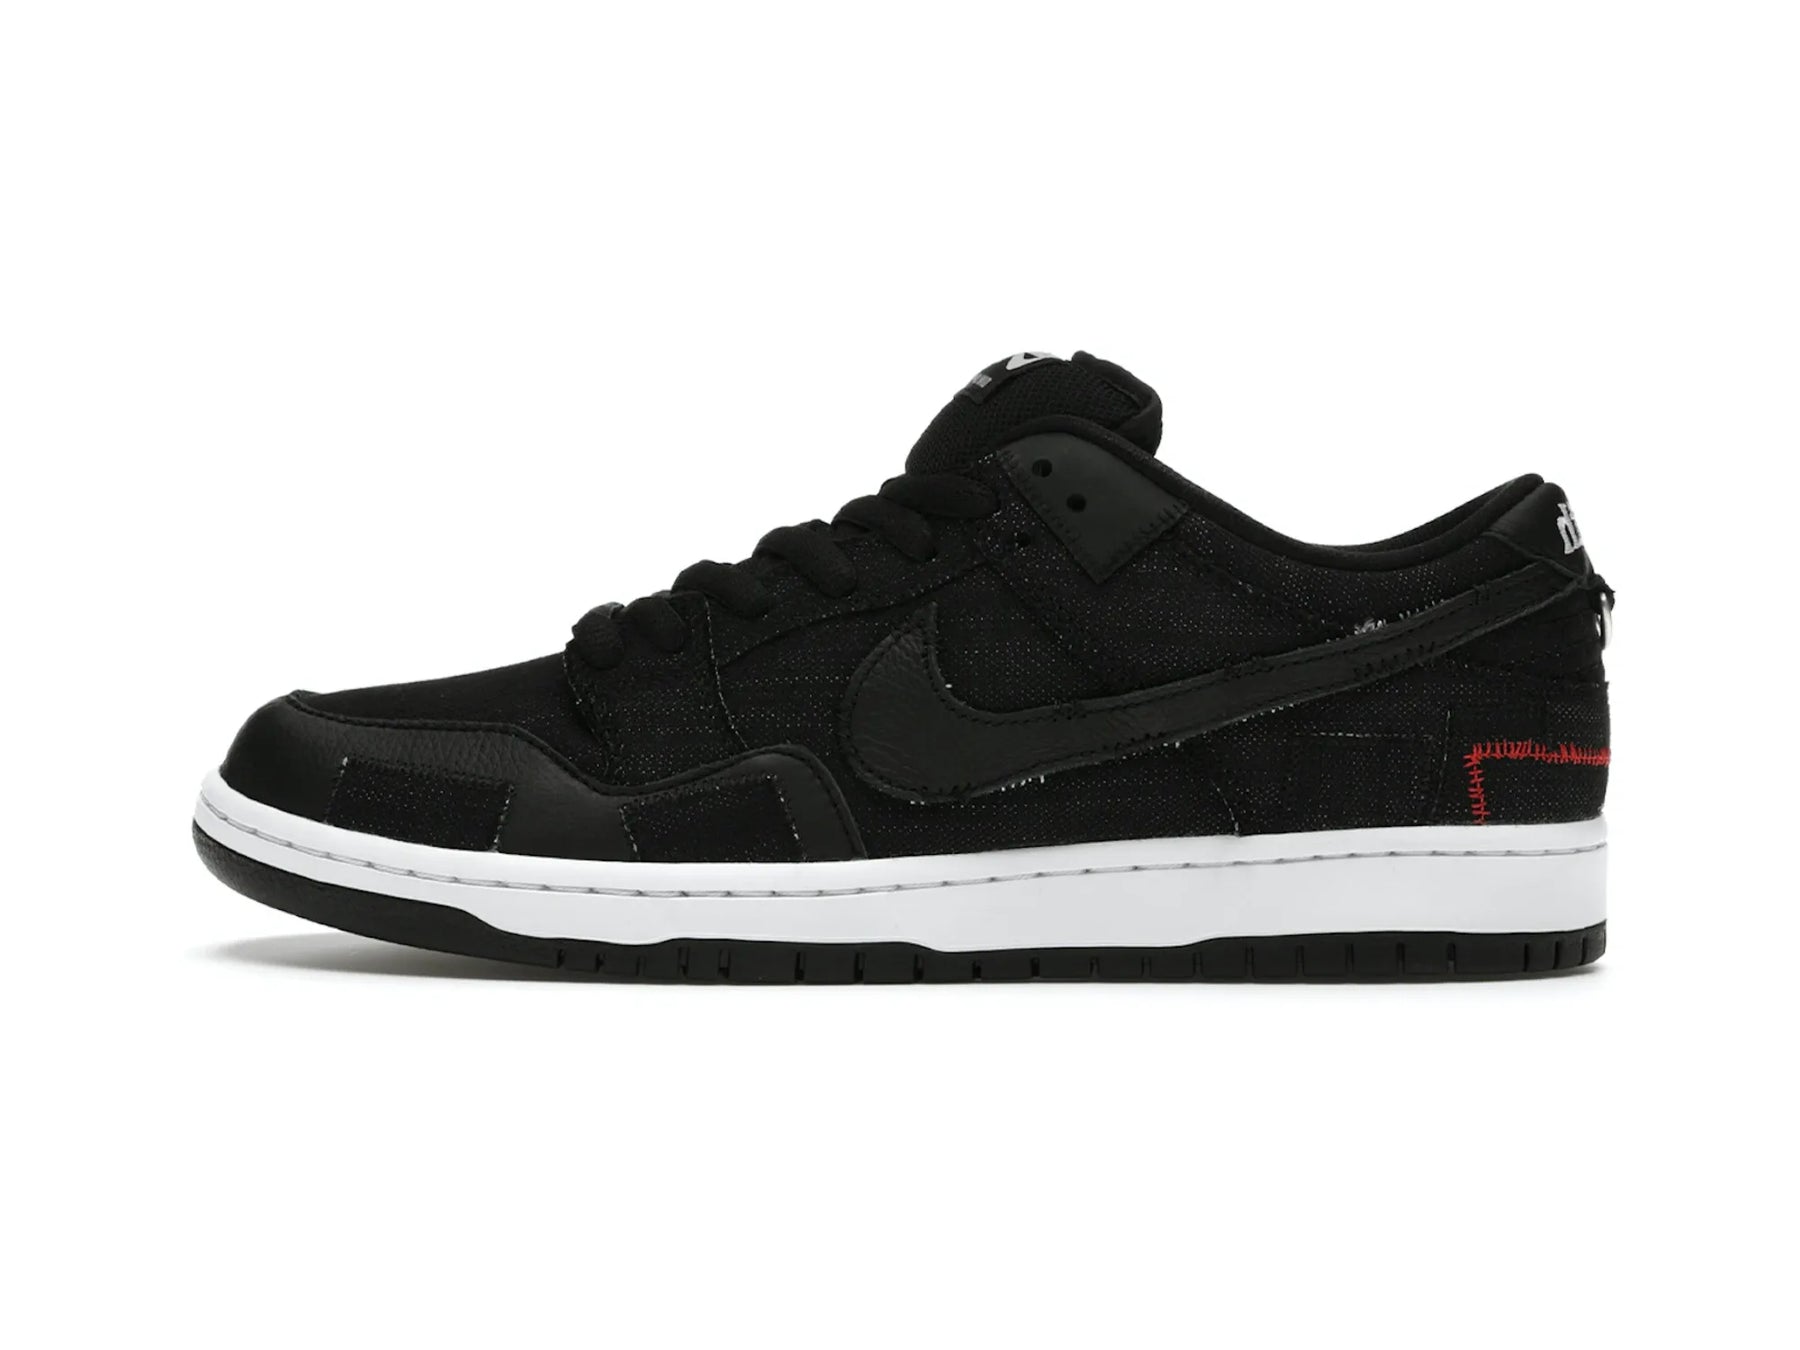 Nike SB Dunk Low "Wasted Youth" - street-bill.dk